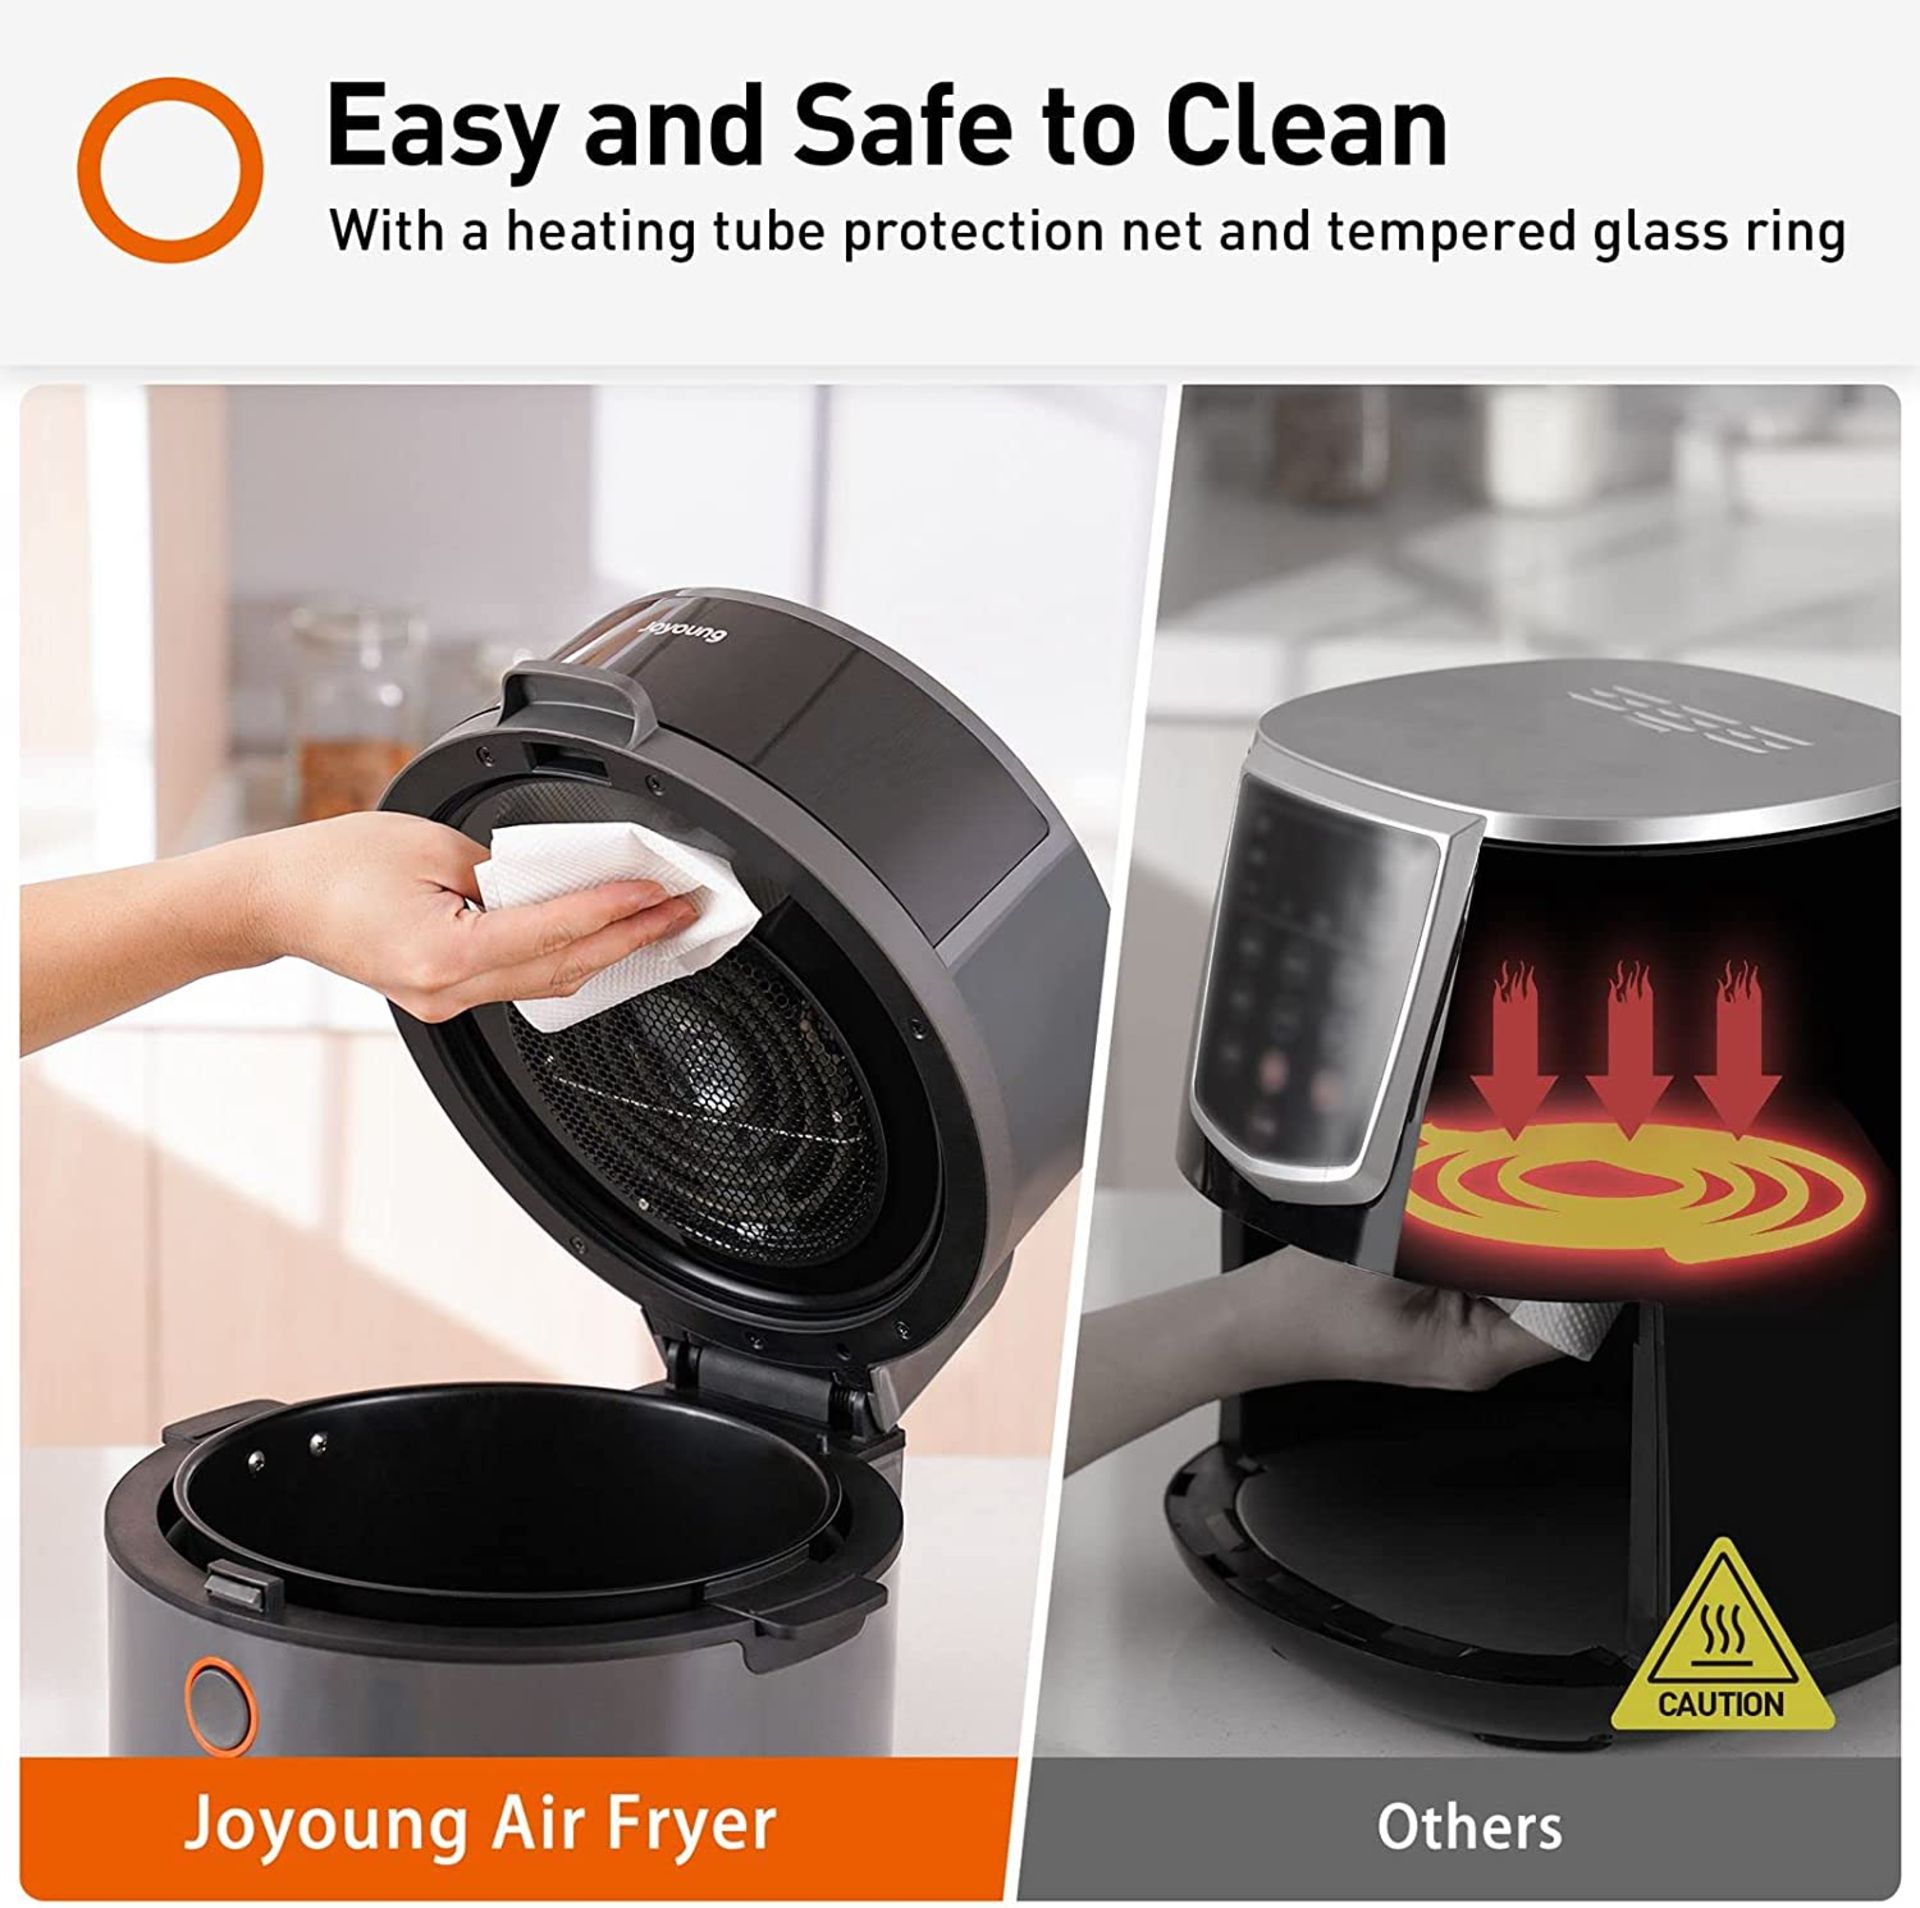 New Boxed JOYOUNG Air Fryer 10 in 1 Digital Air Fryer Toaster Oven 5.8Qt with Free Recipe. RRP £ - Image 7 of 9